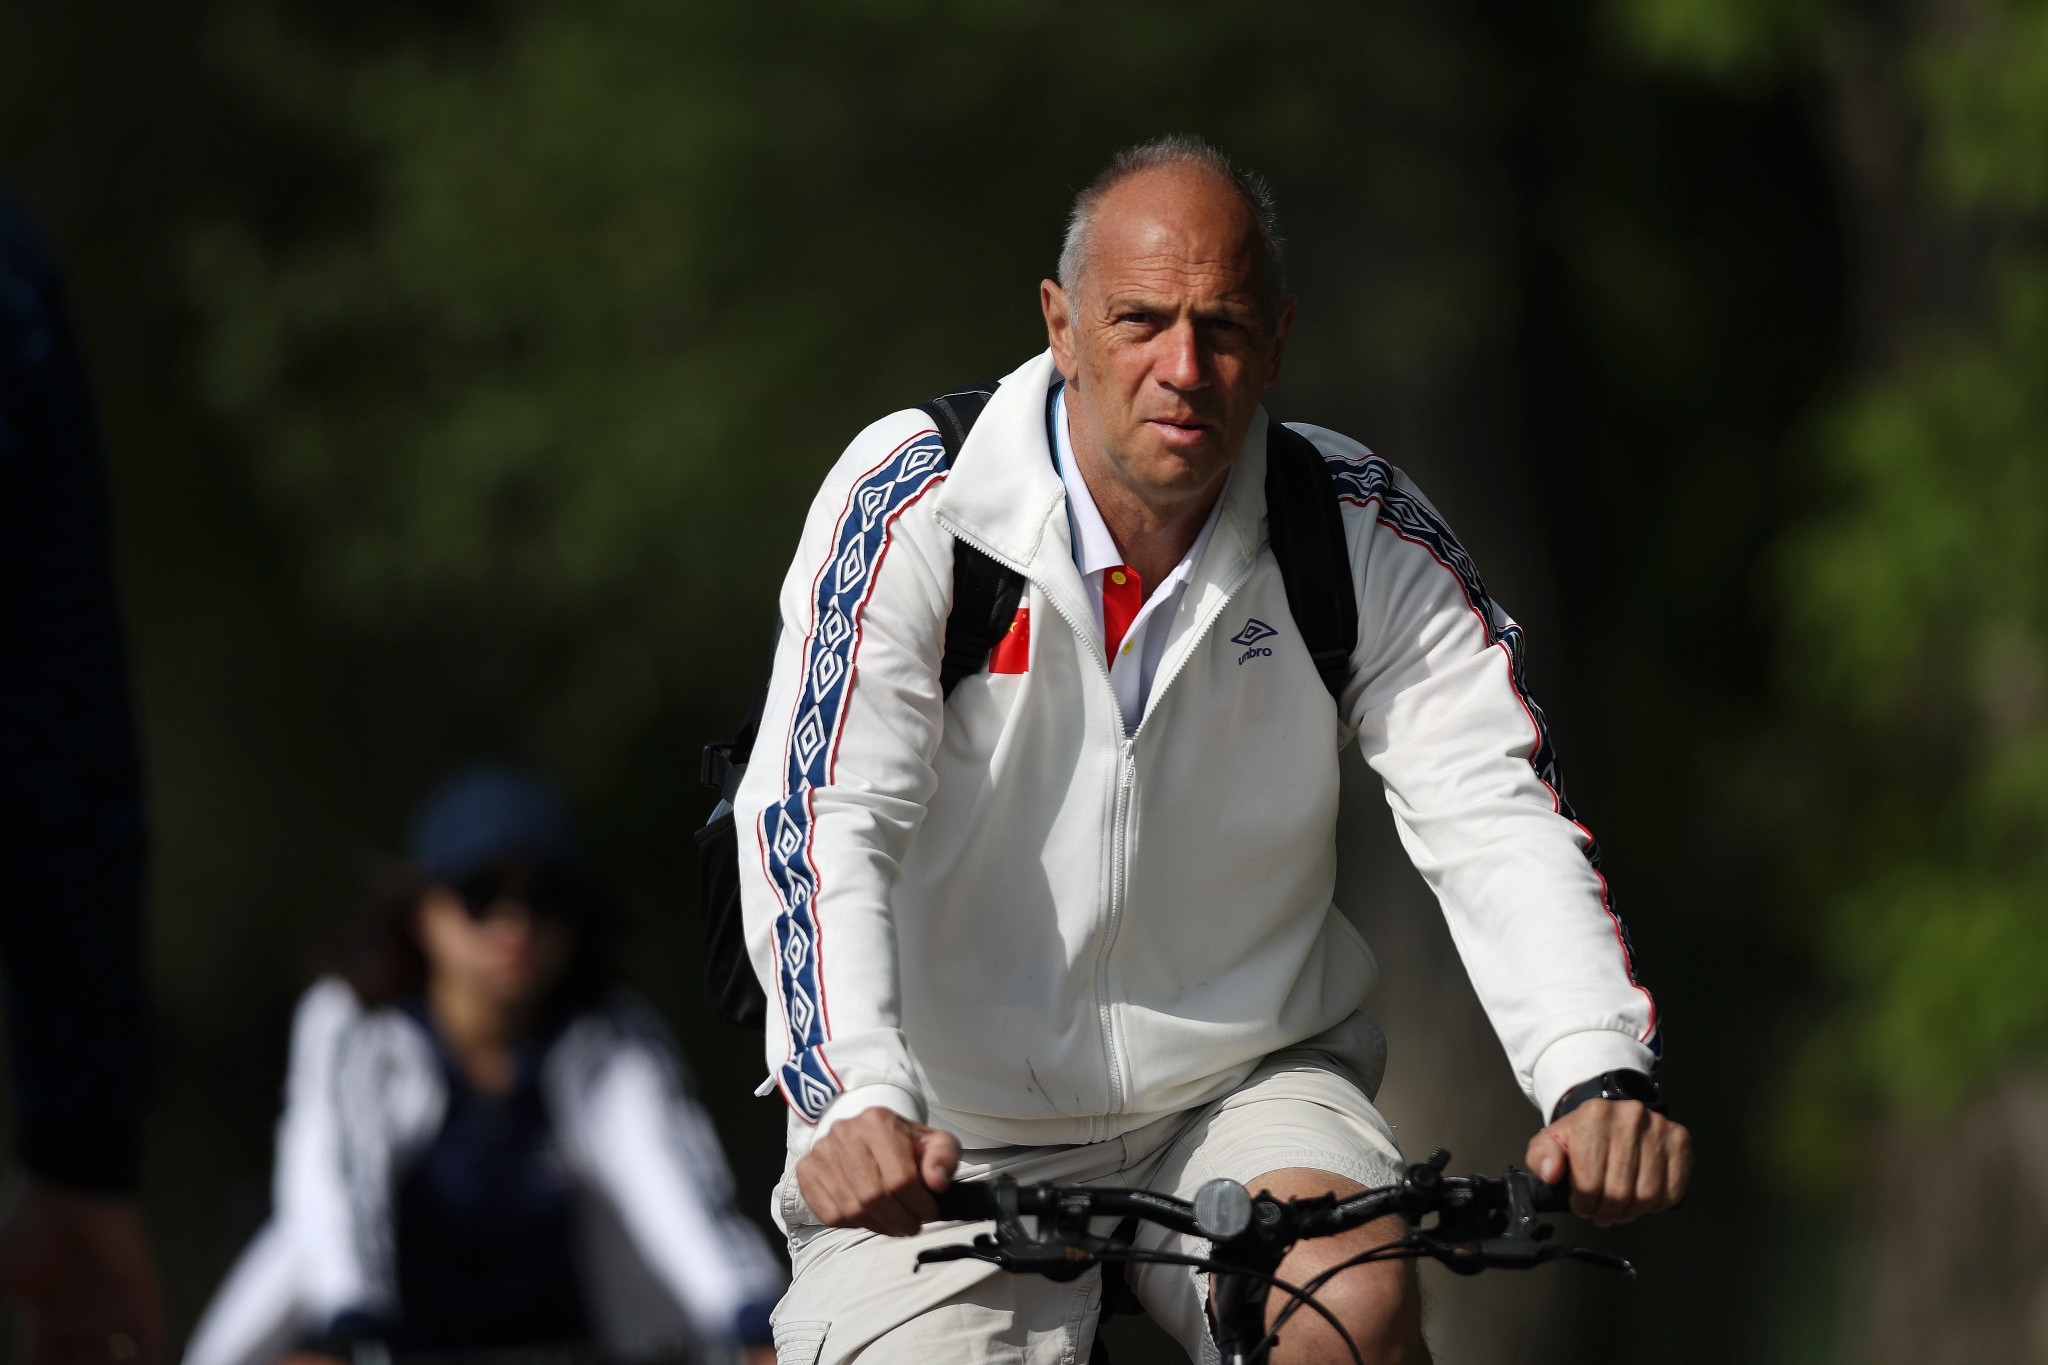 Britain's Sir Steve Redgrave became China's high performance director last year ©Getty Images